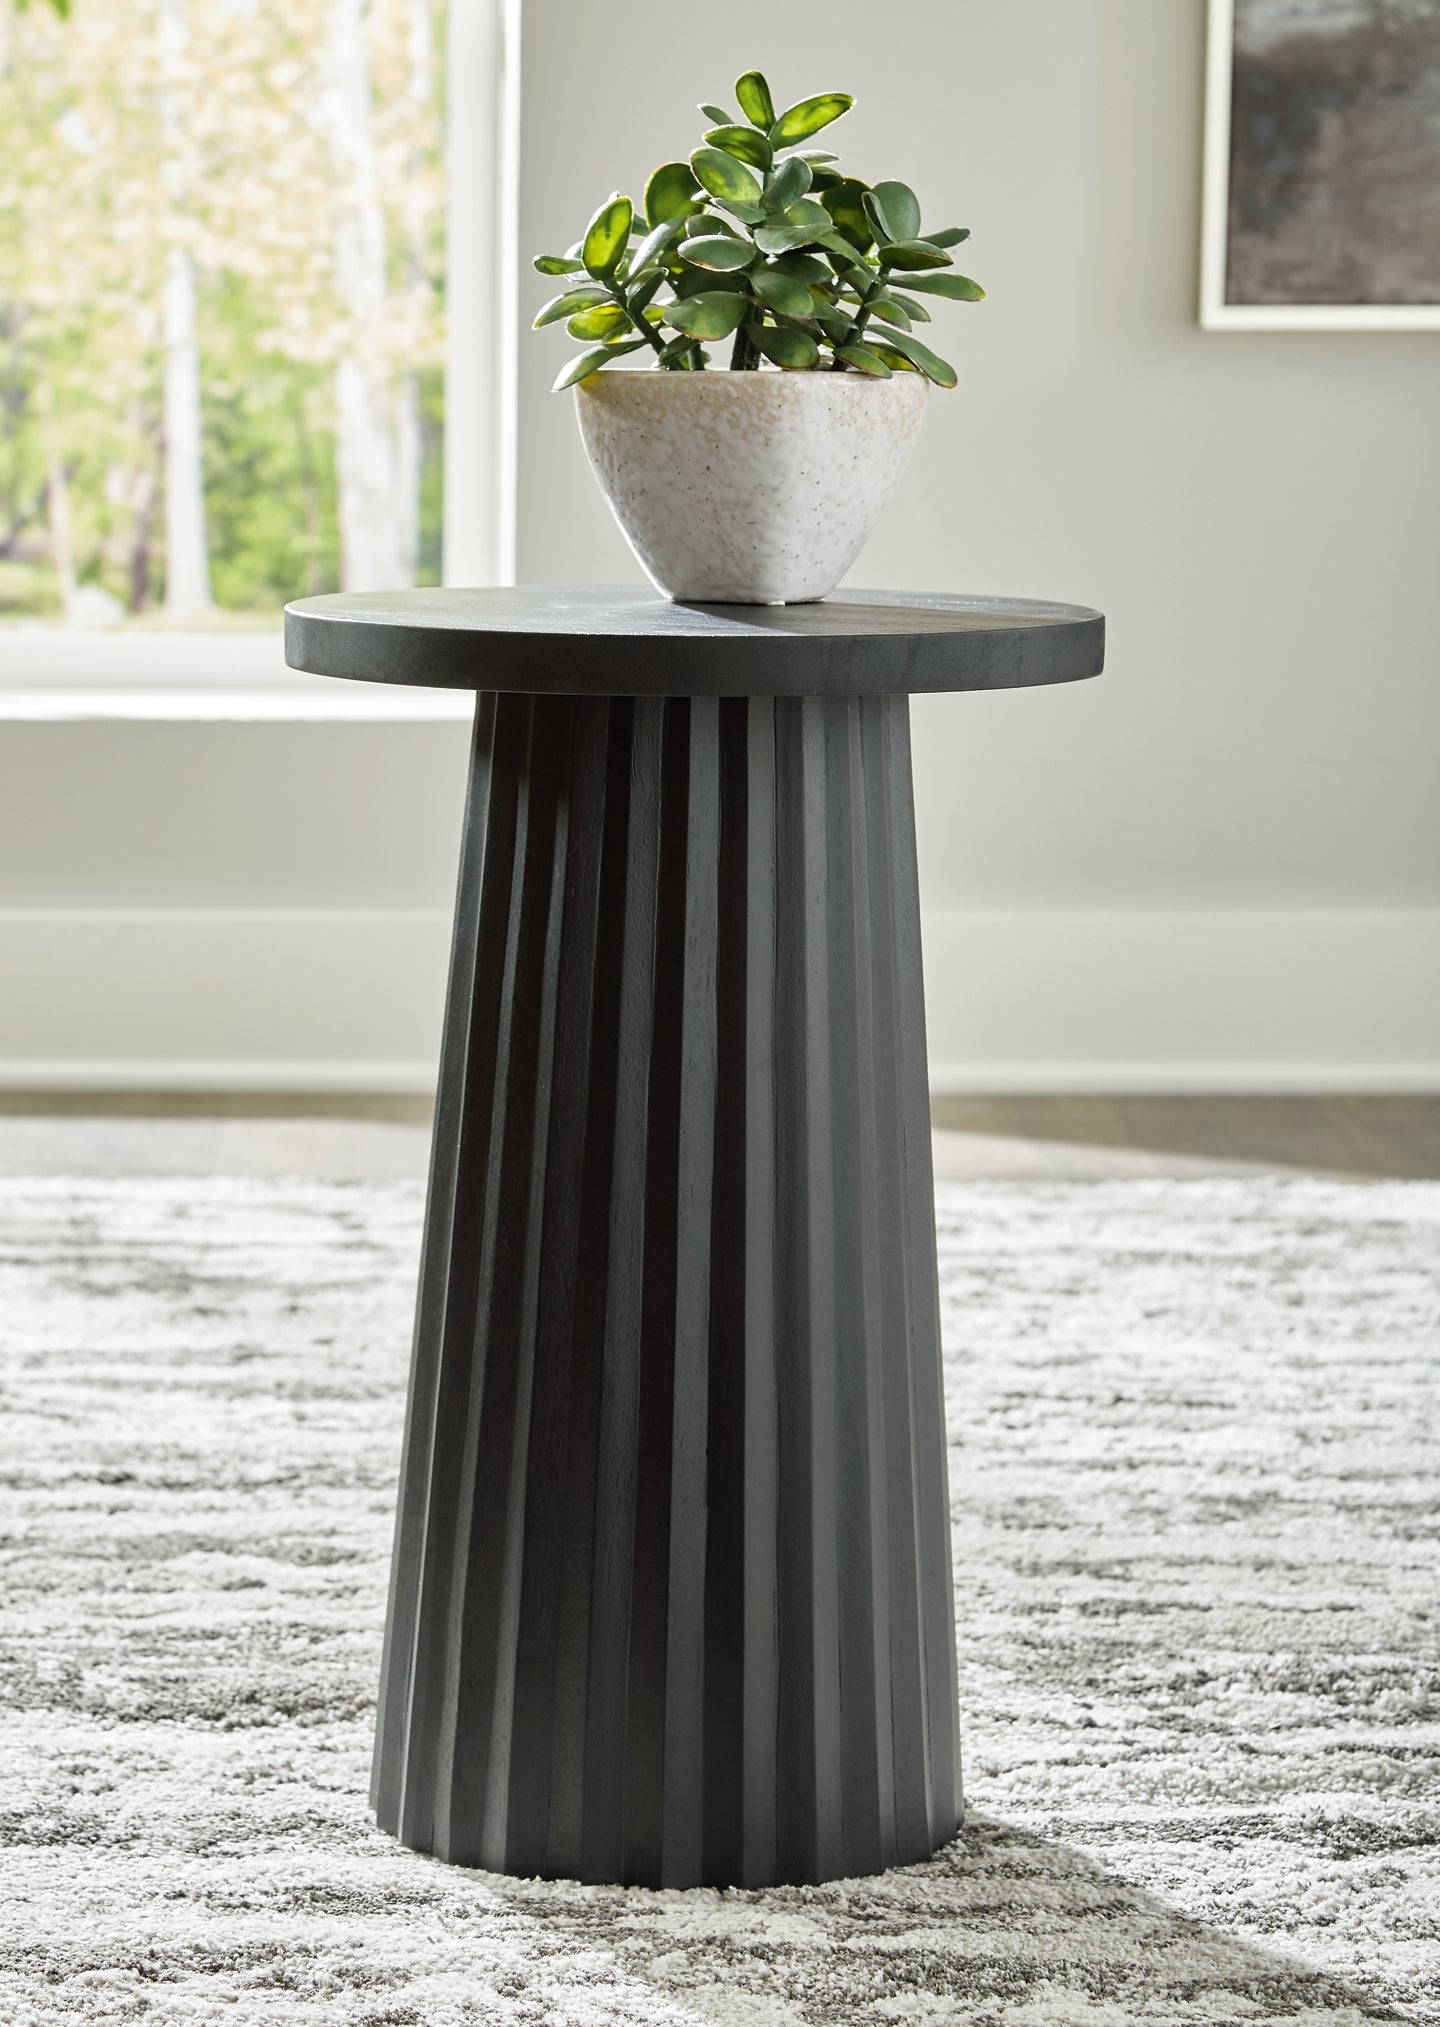 Very Merry Deals! Occasional Tables Under $599